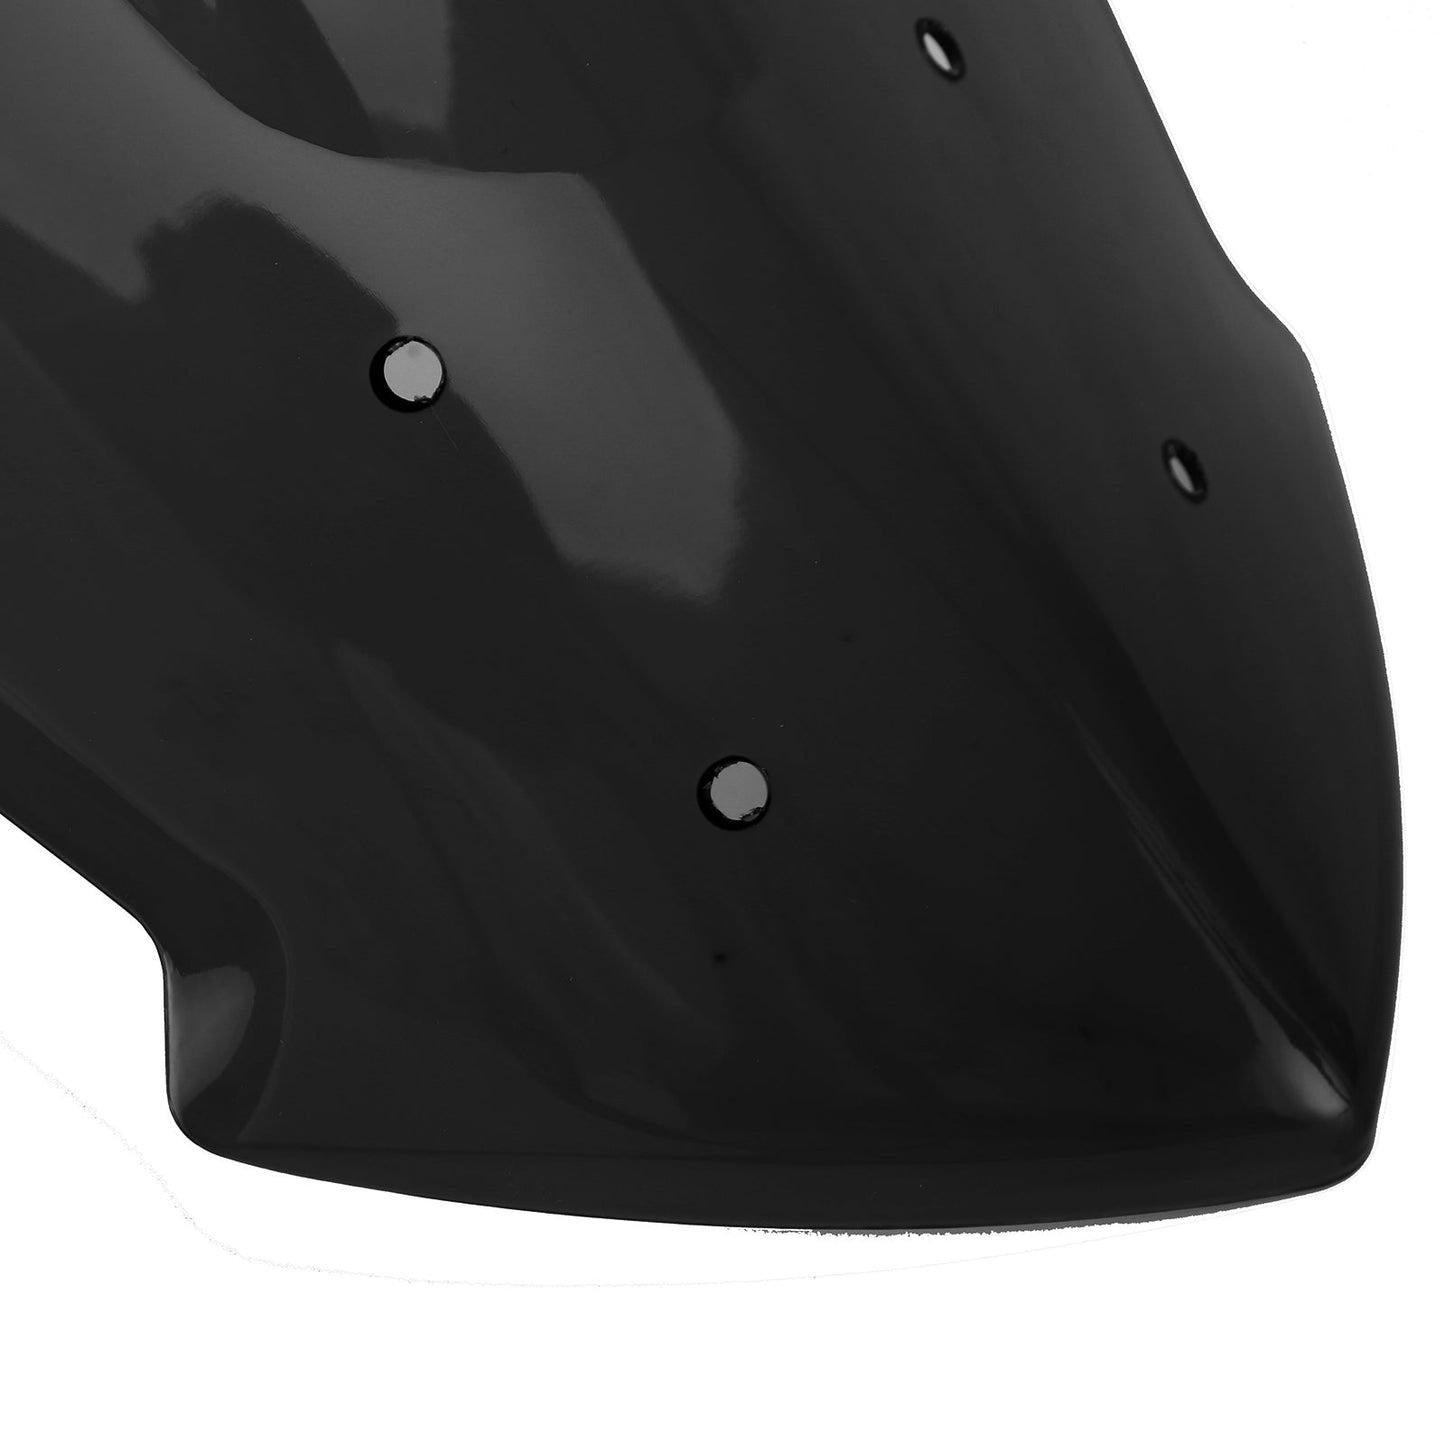 Windscreen Windshield Shield Protector fit for Yamaha MT-07 2018-2020